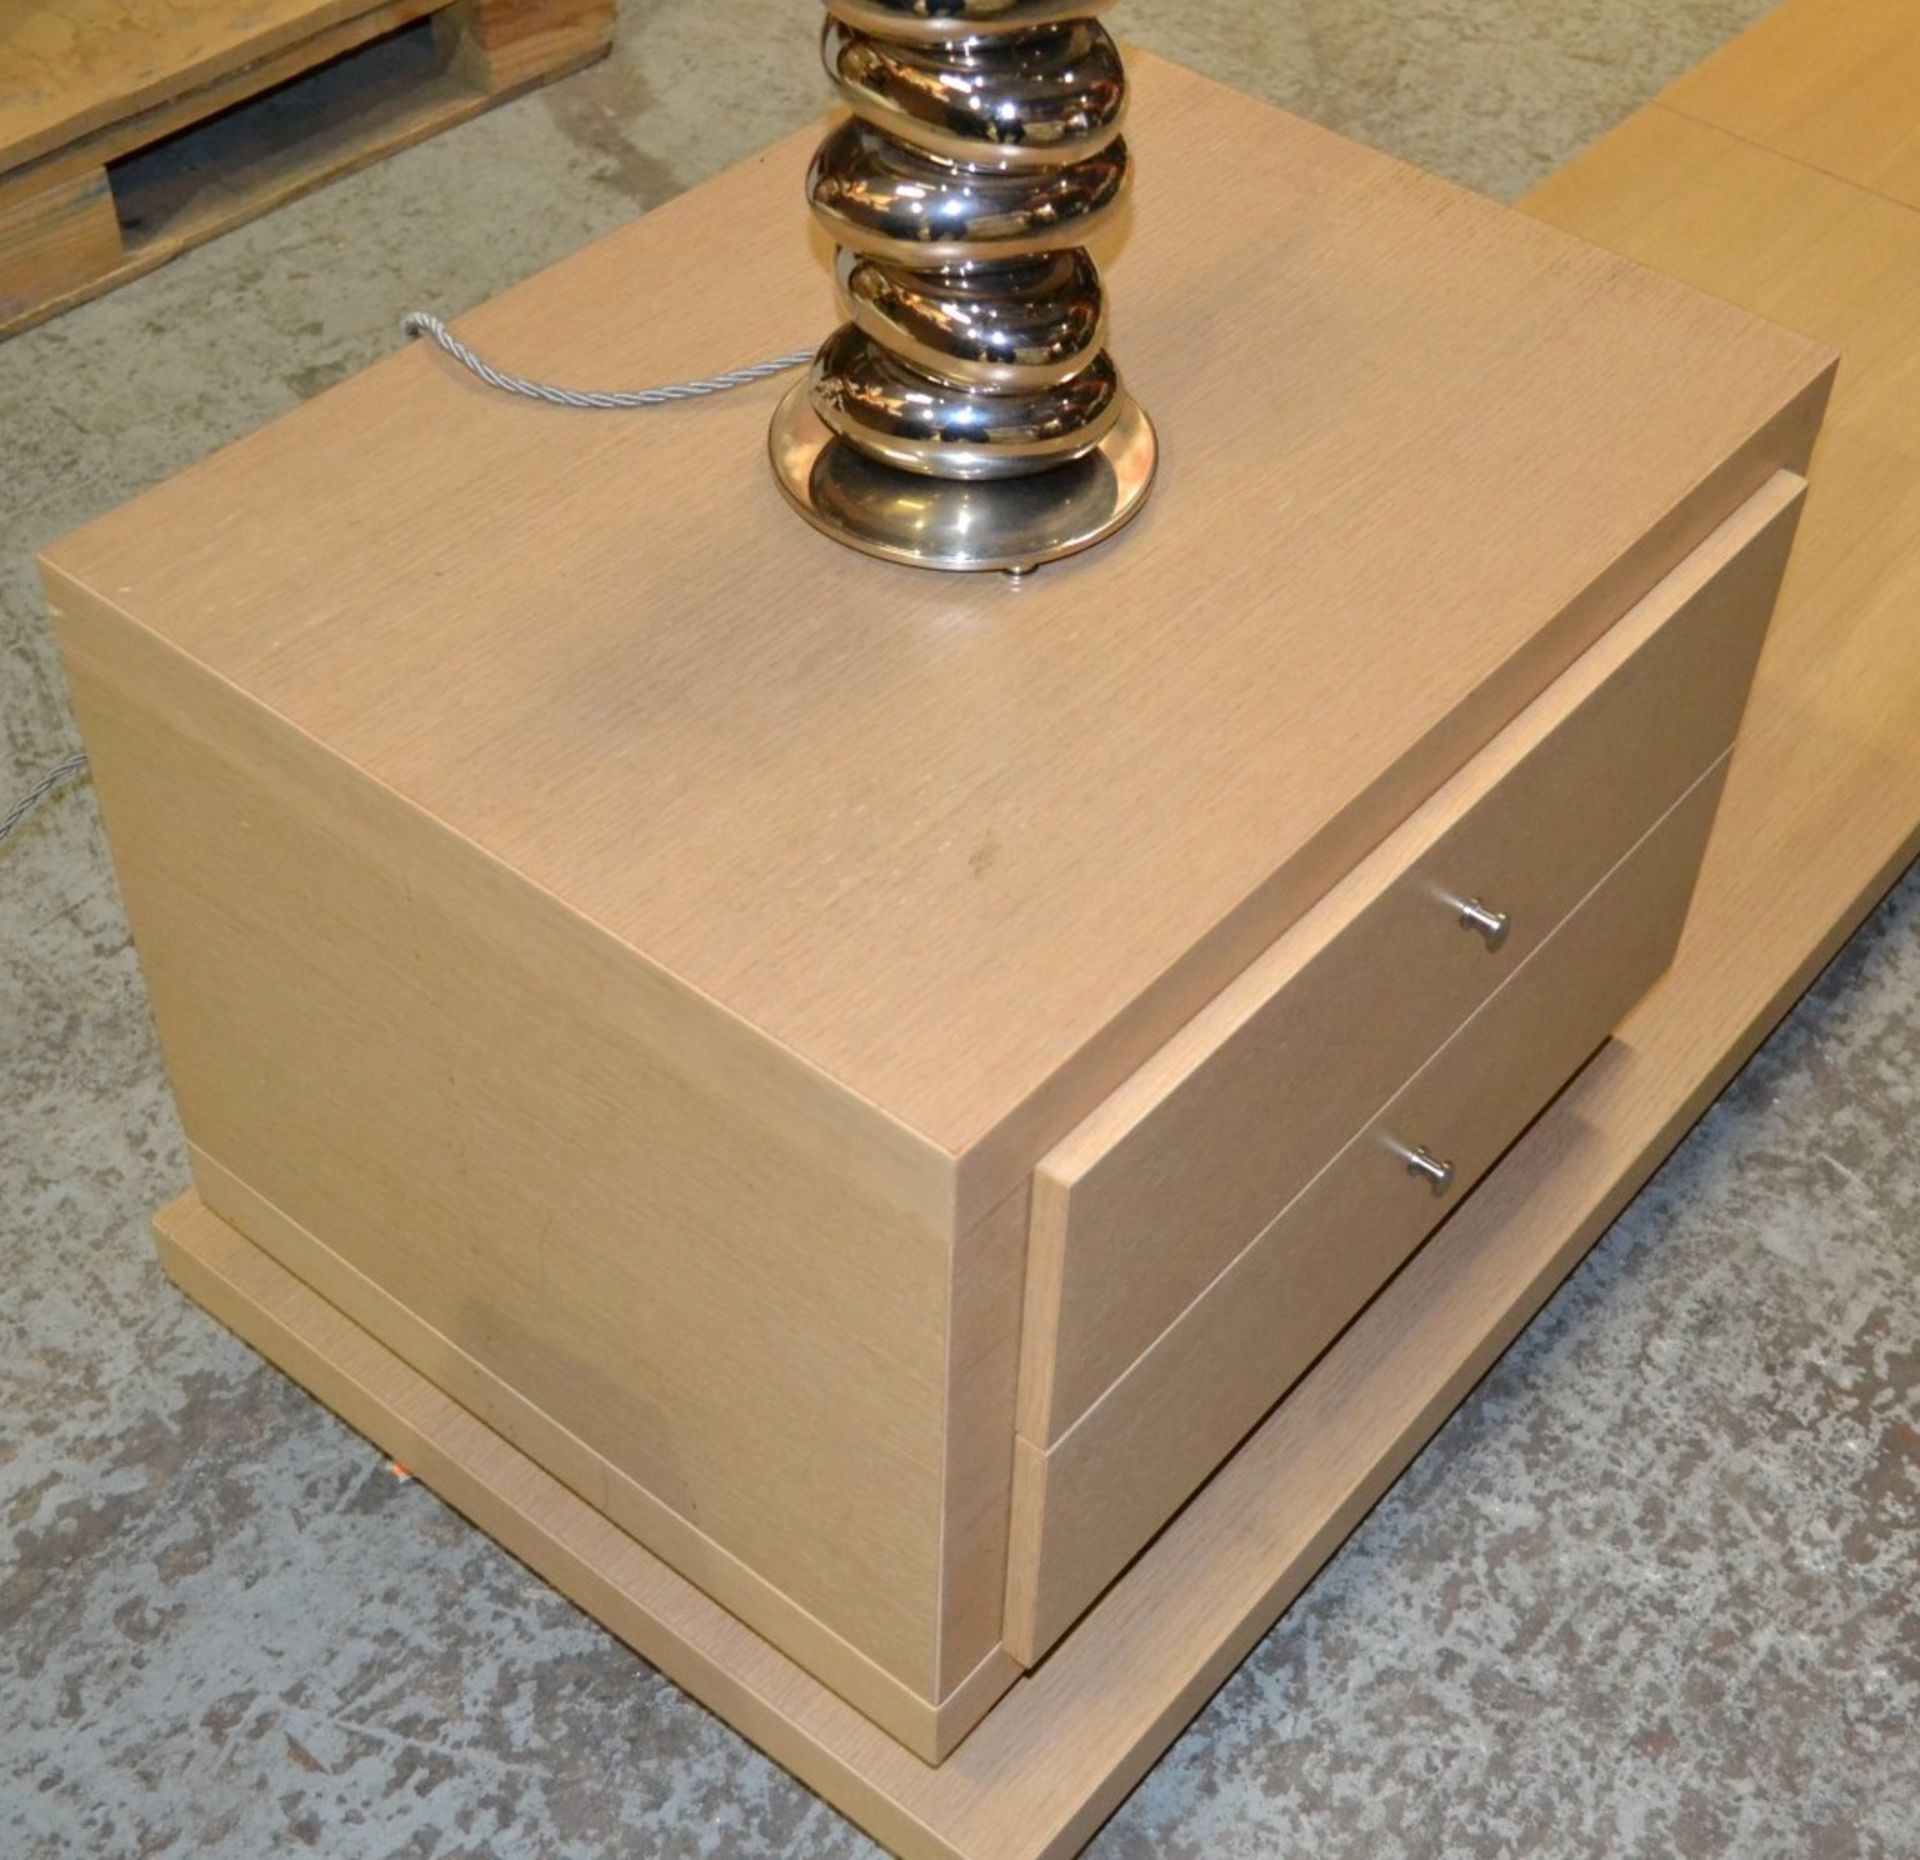 2 x Bedside Cabinets On Underbed Plinth With A Classic Oak Finish - 3 Metres Wide  - Used In Good - Image 7 of 8